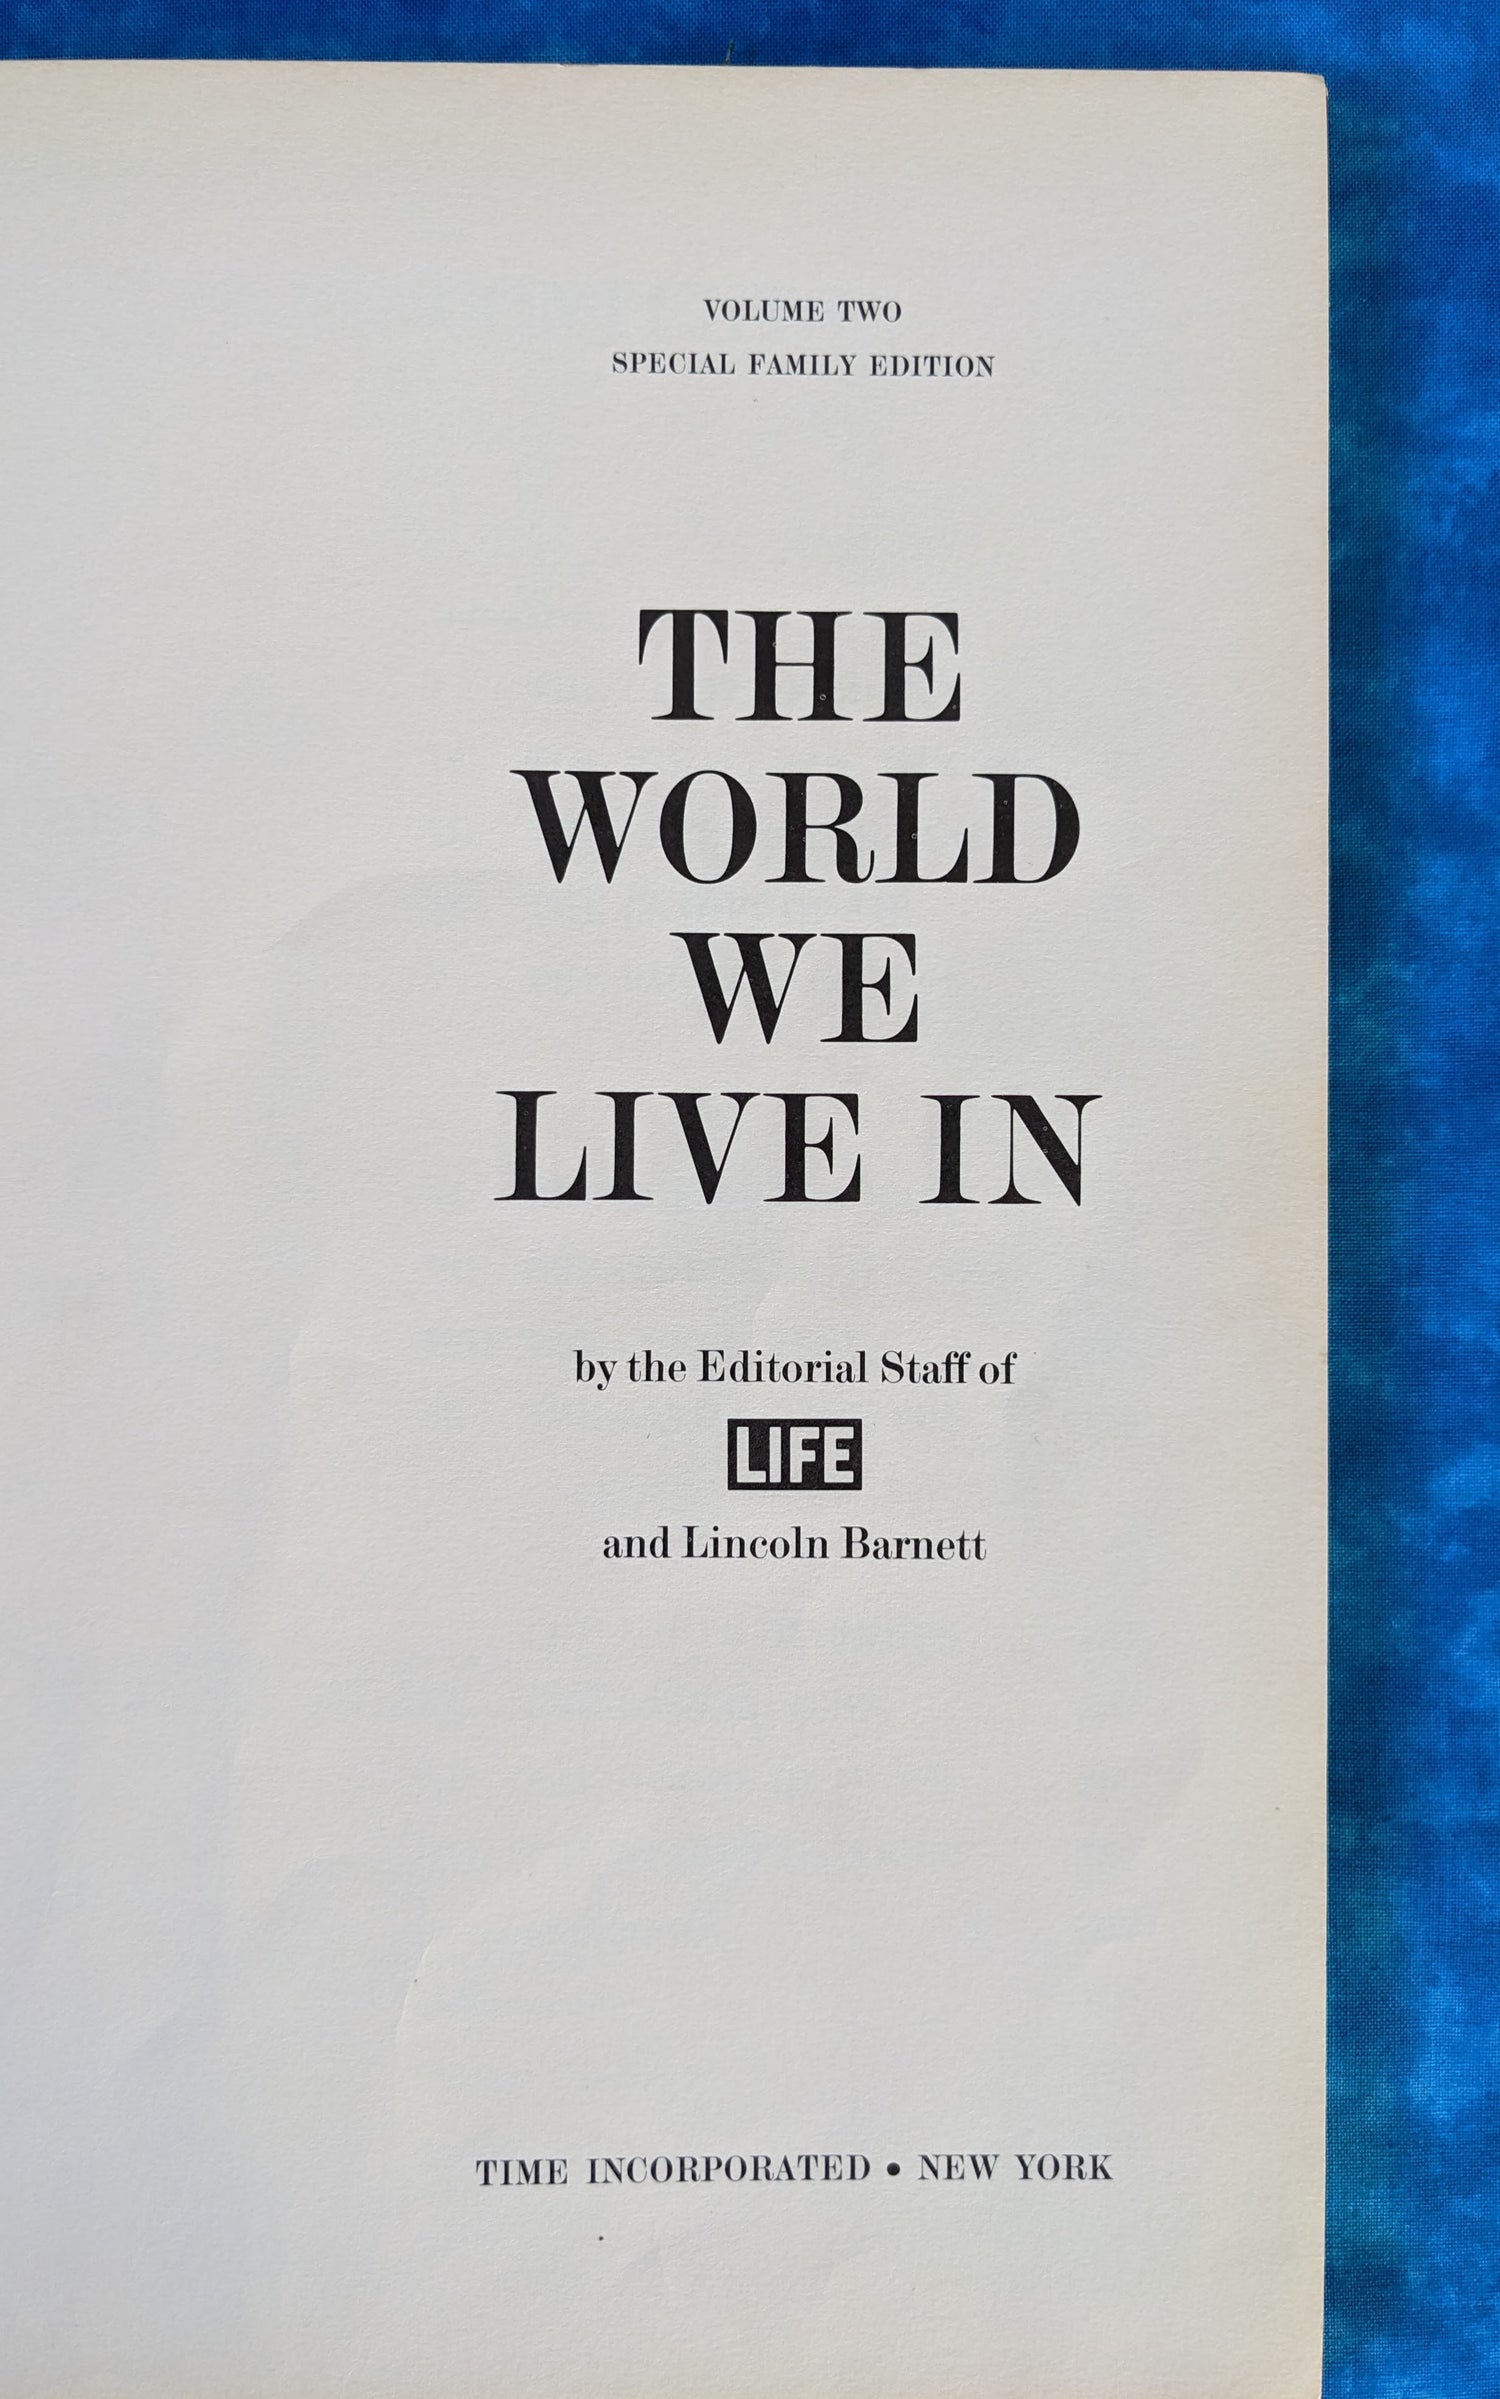 The World We Live In, Part 2: The Development of Life vintage book title page